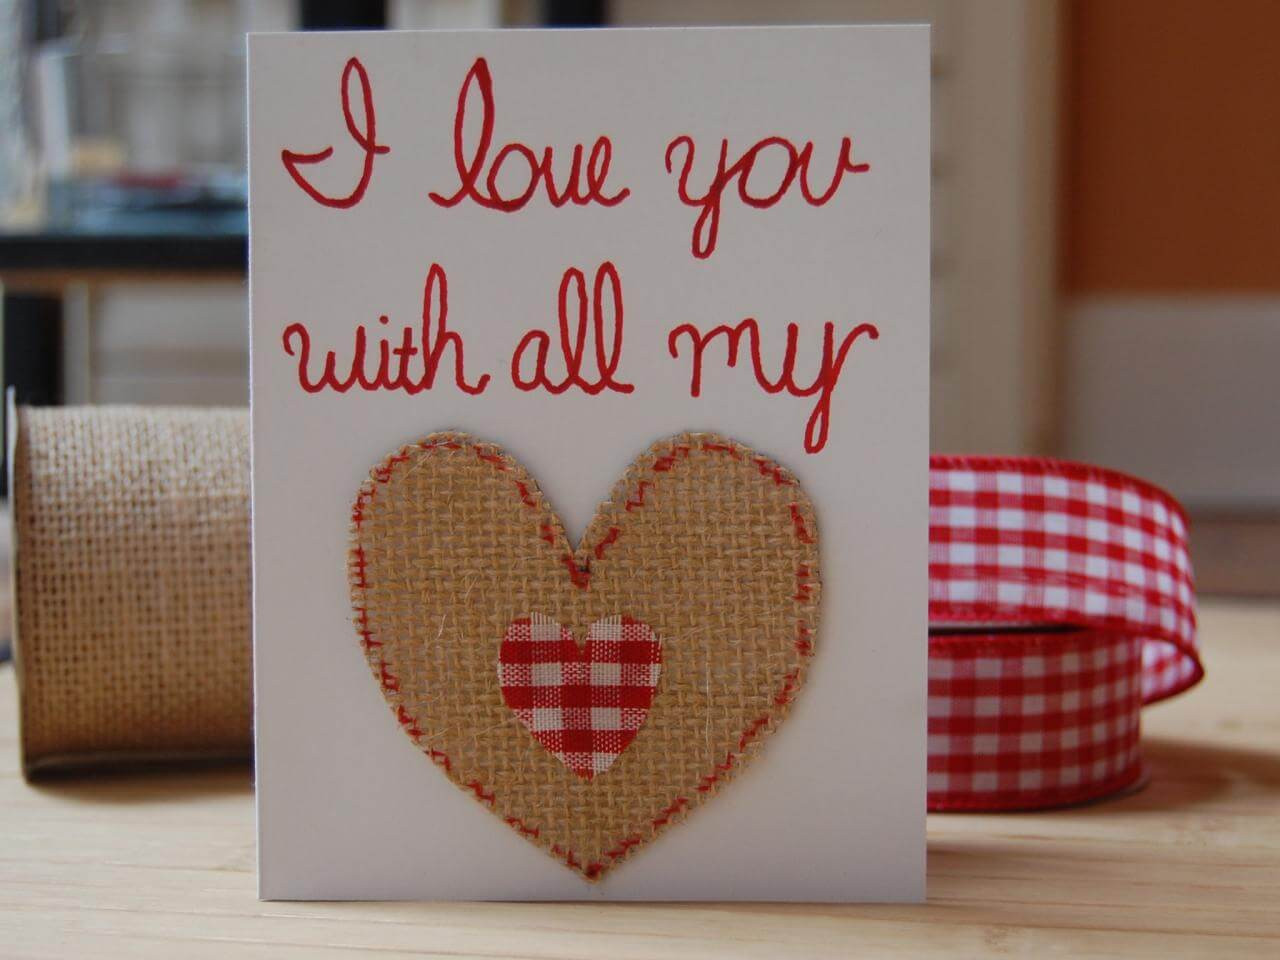 Homemade Valentine Day Gift Ideas For Him
 45 Homemade Valentines Day Gift Ideas For Him